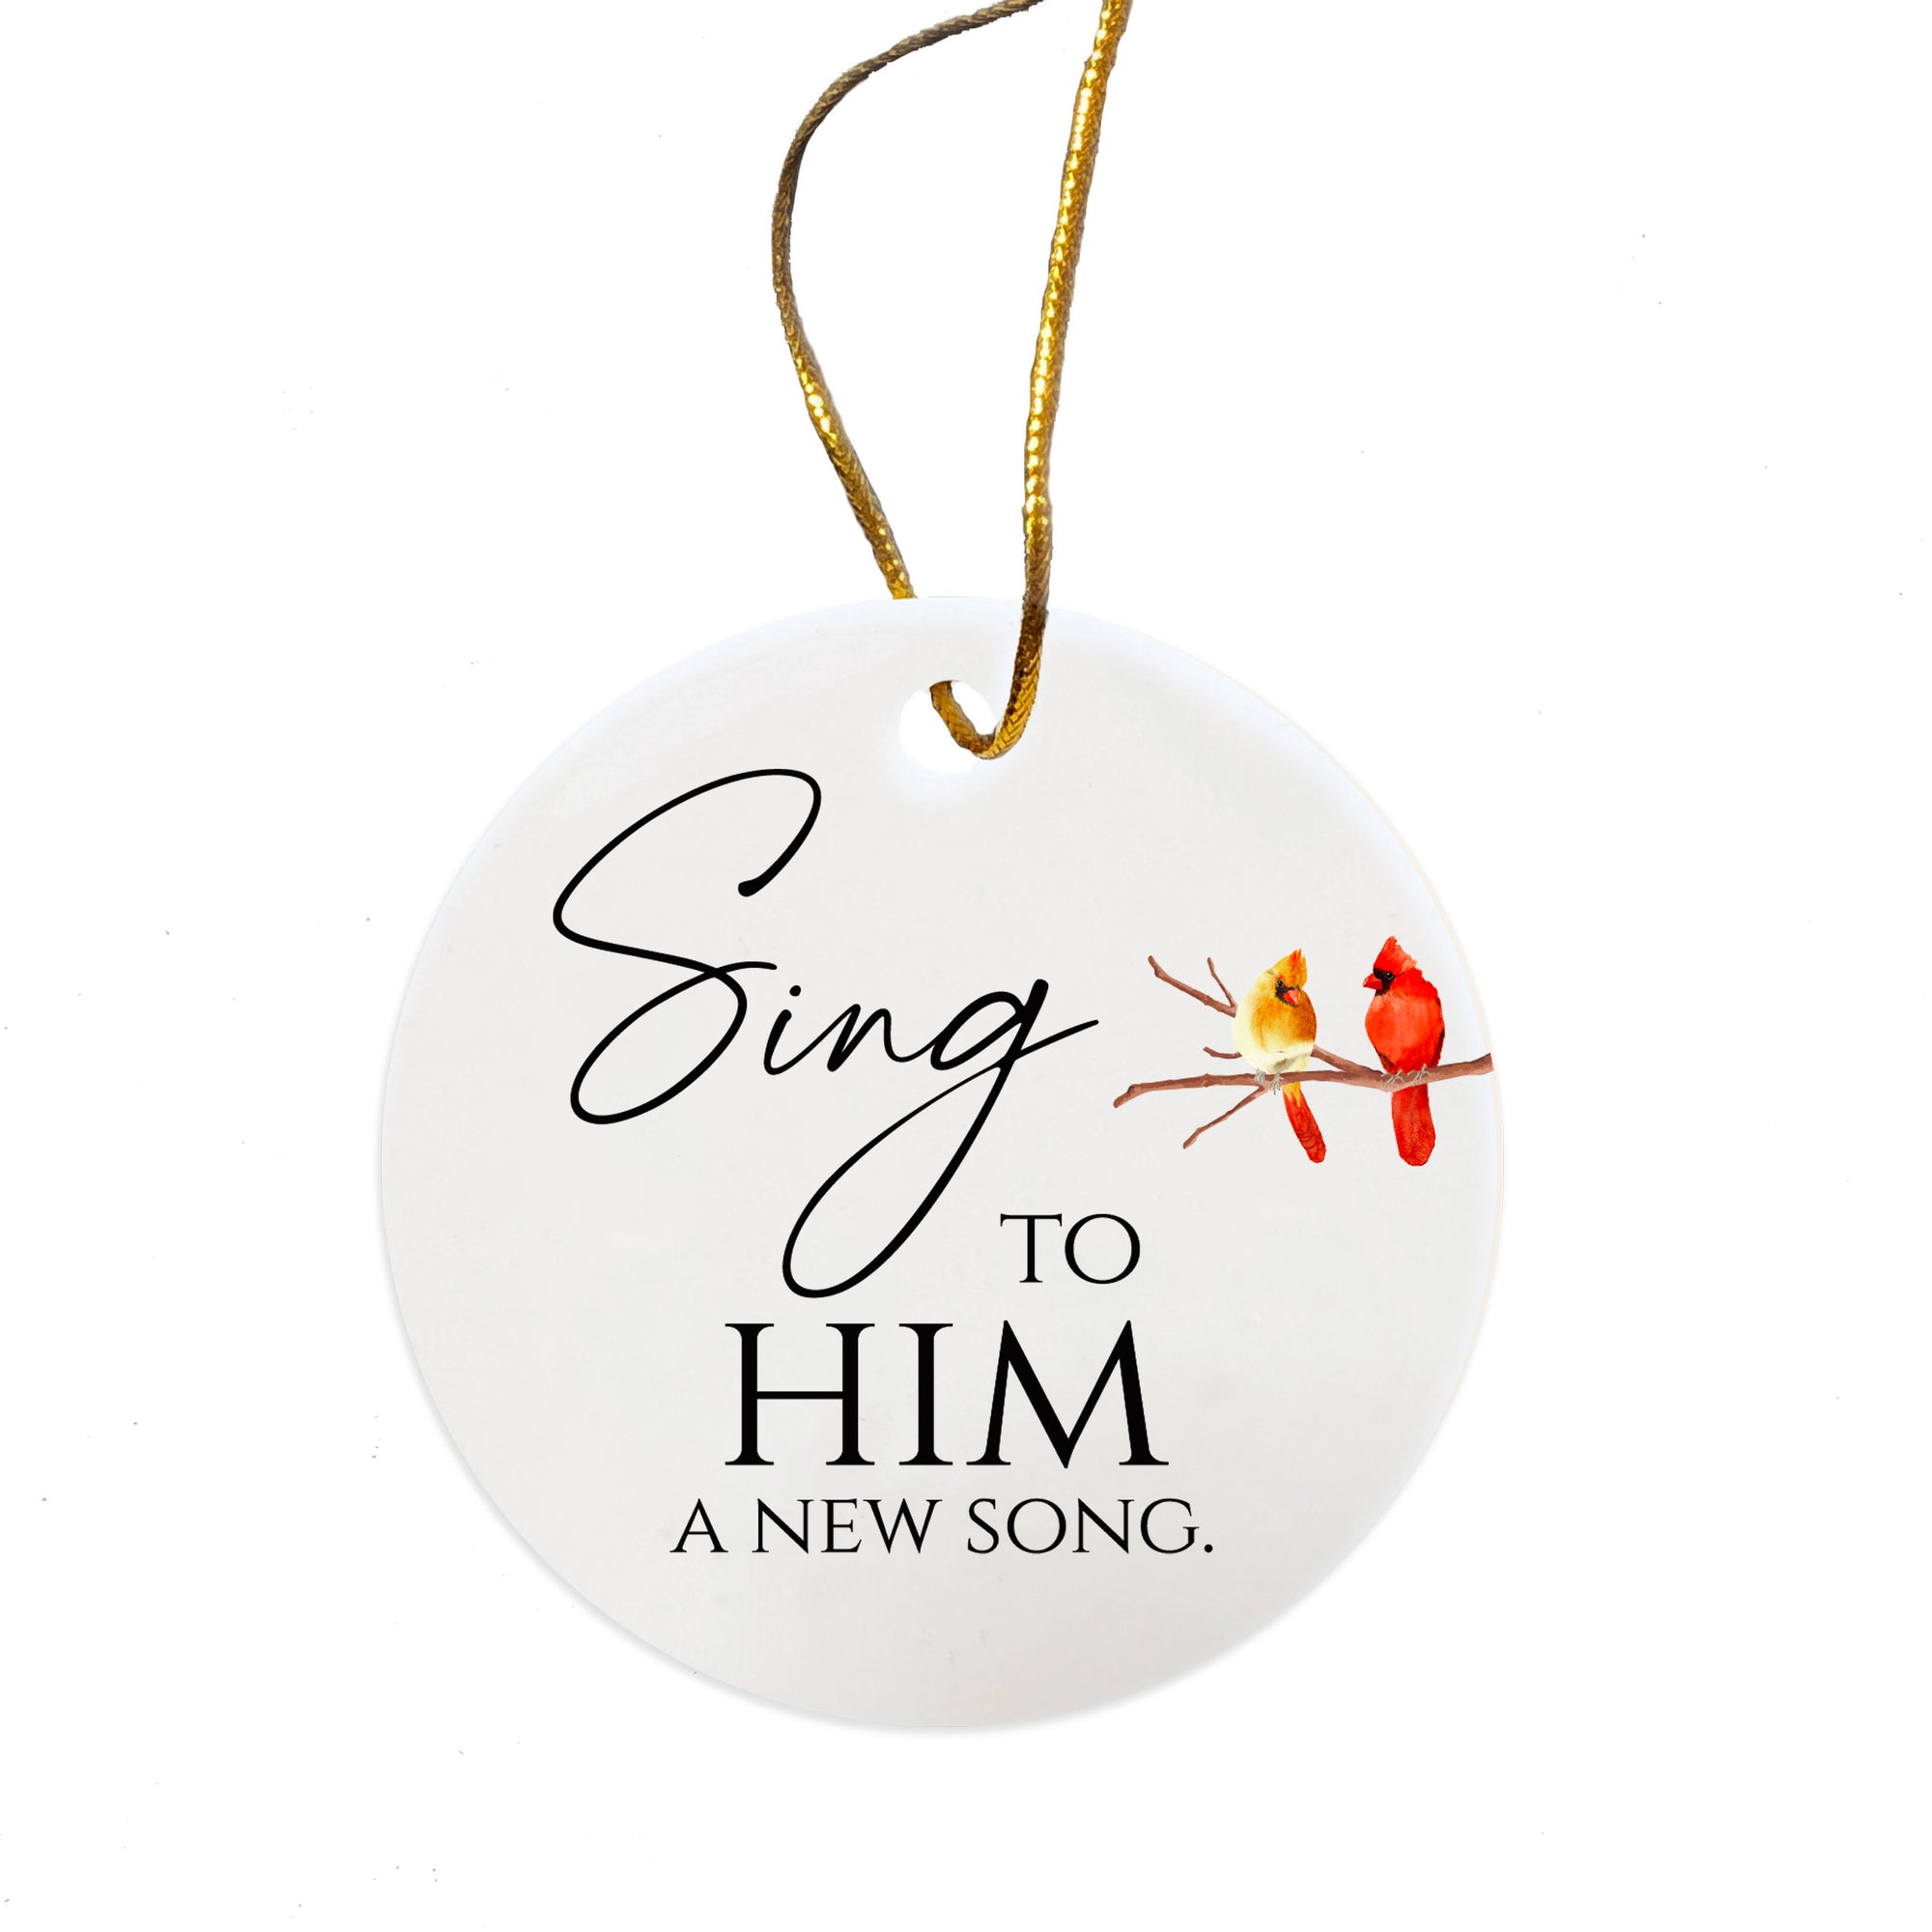 White Ceramic Cardinal Ornament With Everyday Verses Gift Ideas - Sing To Him